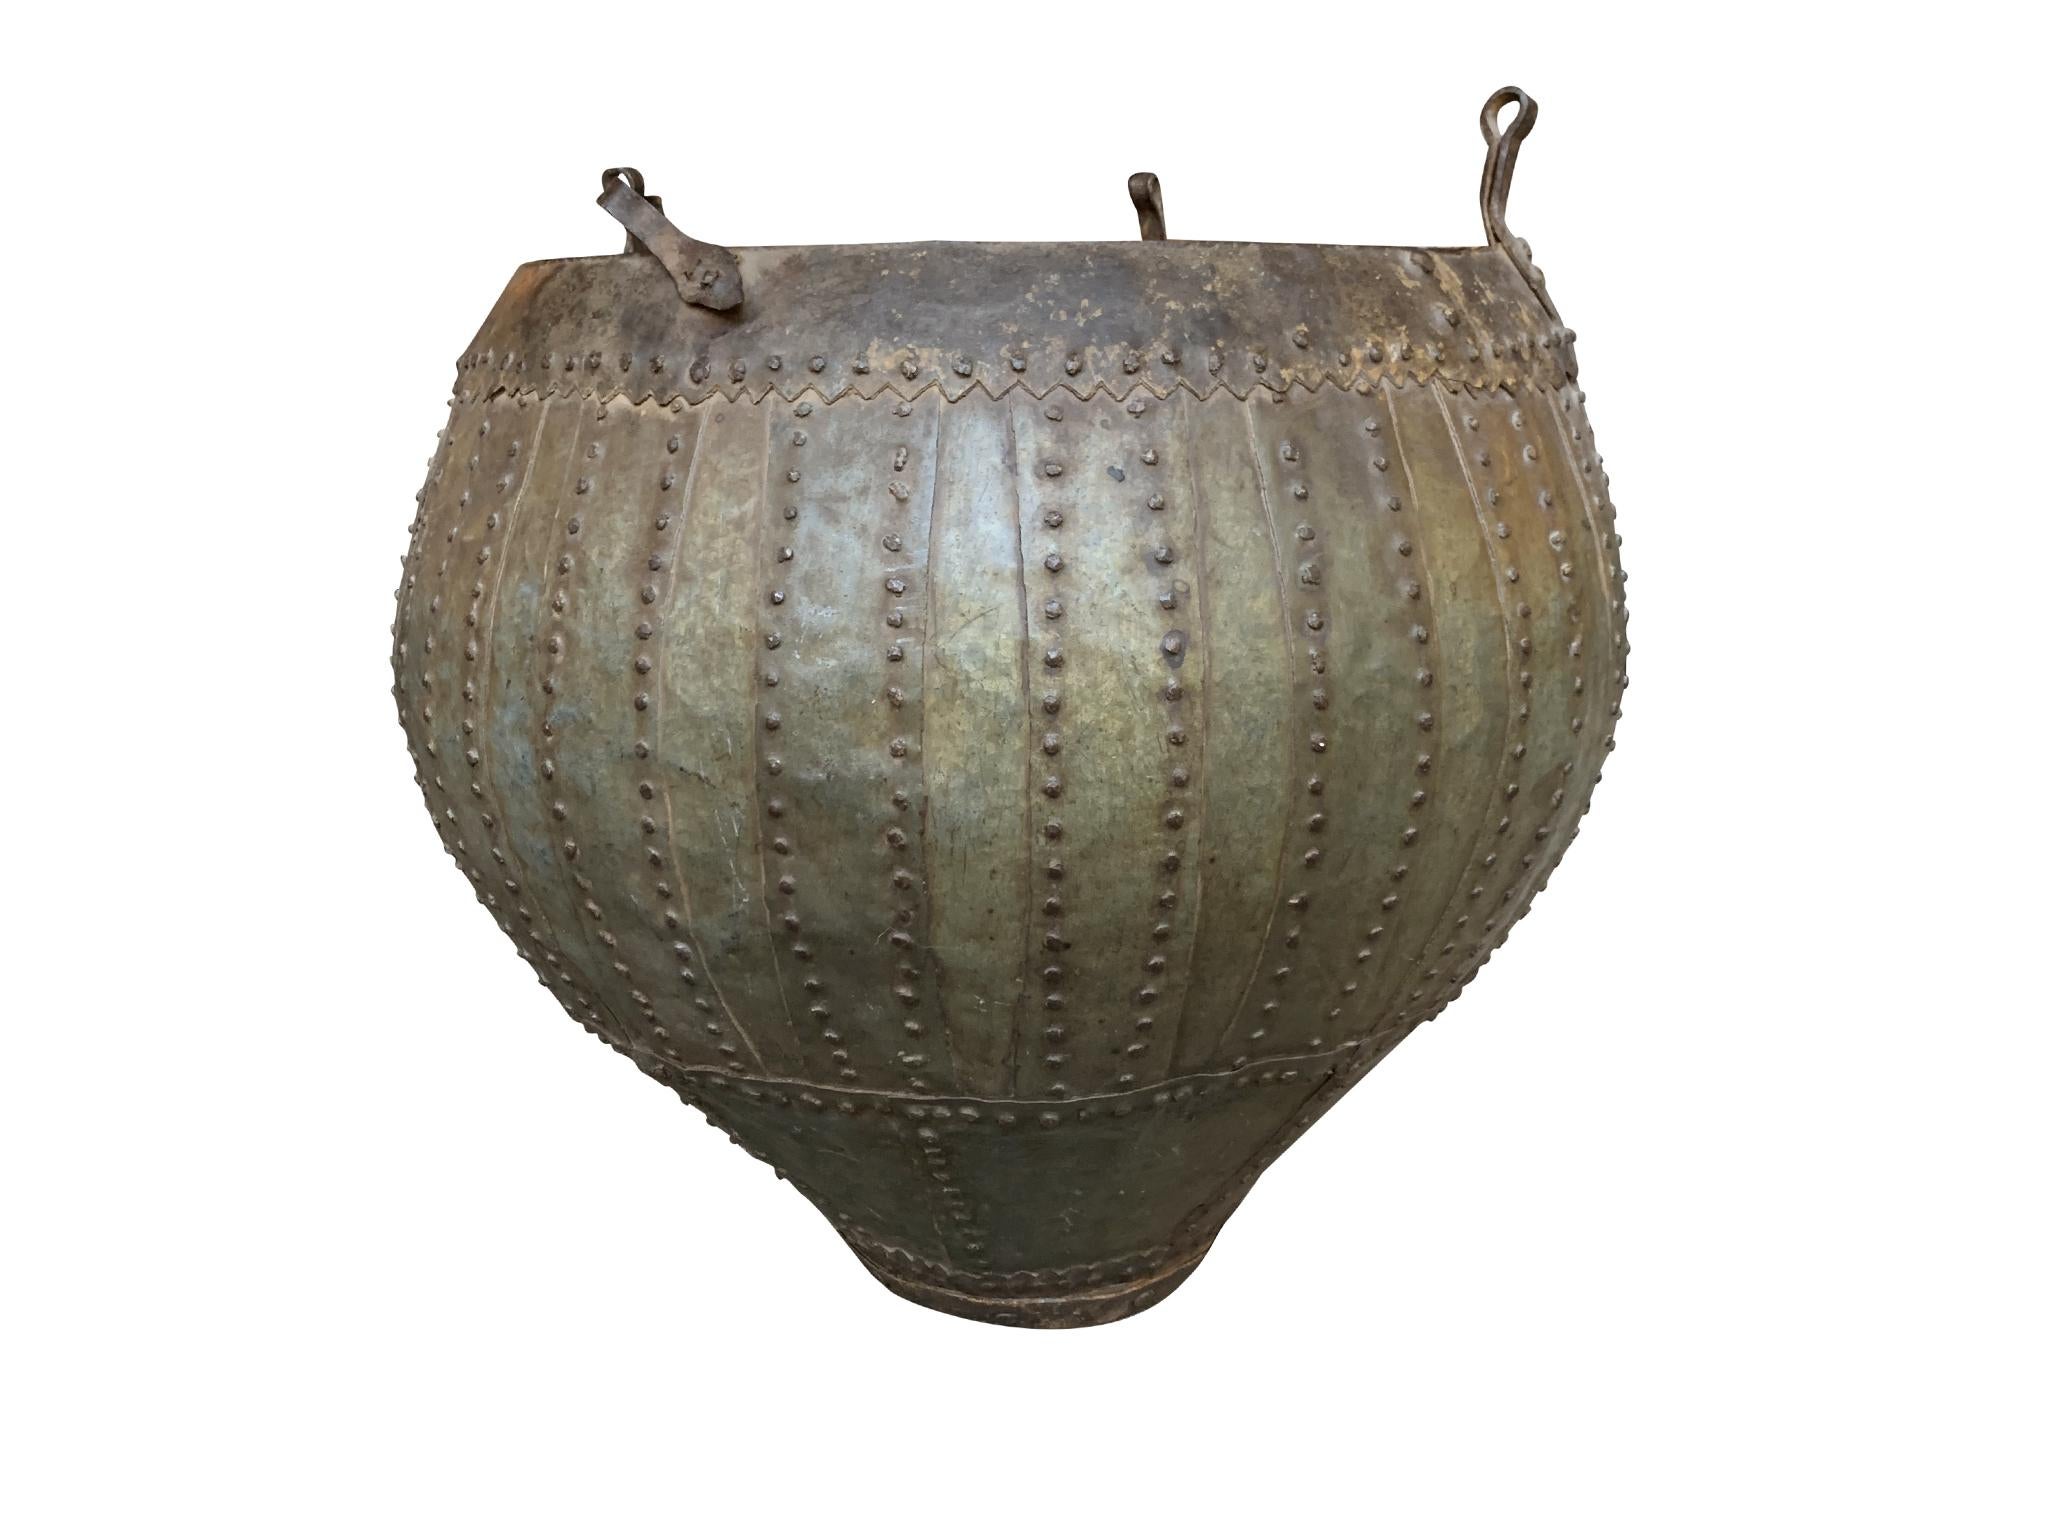 A large 20th Century urn comprised of hammered, studded brass and bronze. Its spare, industrial structure is reminiscent of Brutalist design. 

Dimensions:
24 in. diameter
22.5 in. height to rim
25 in. height to top of hook